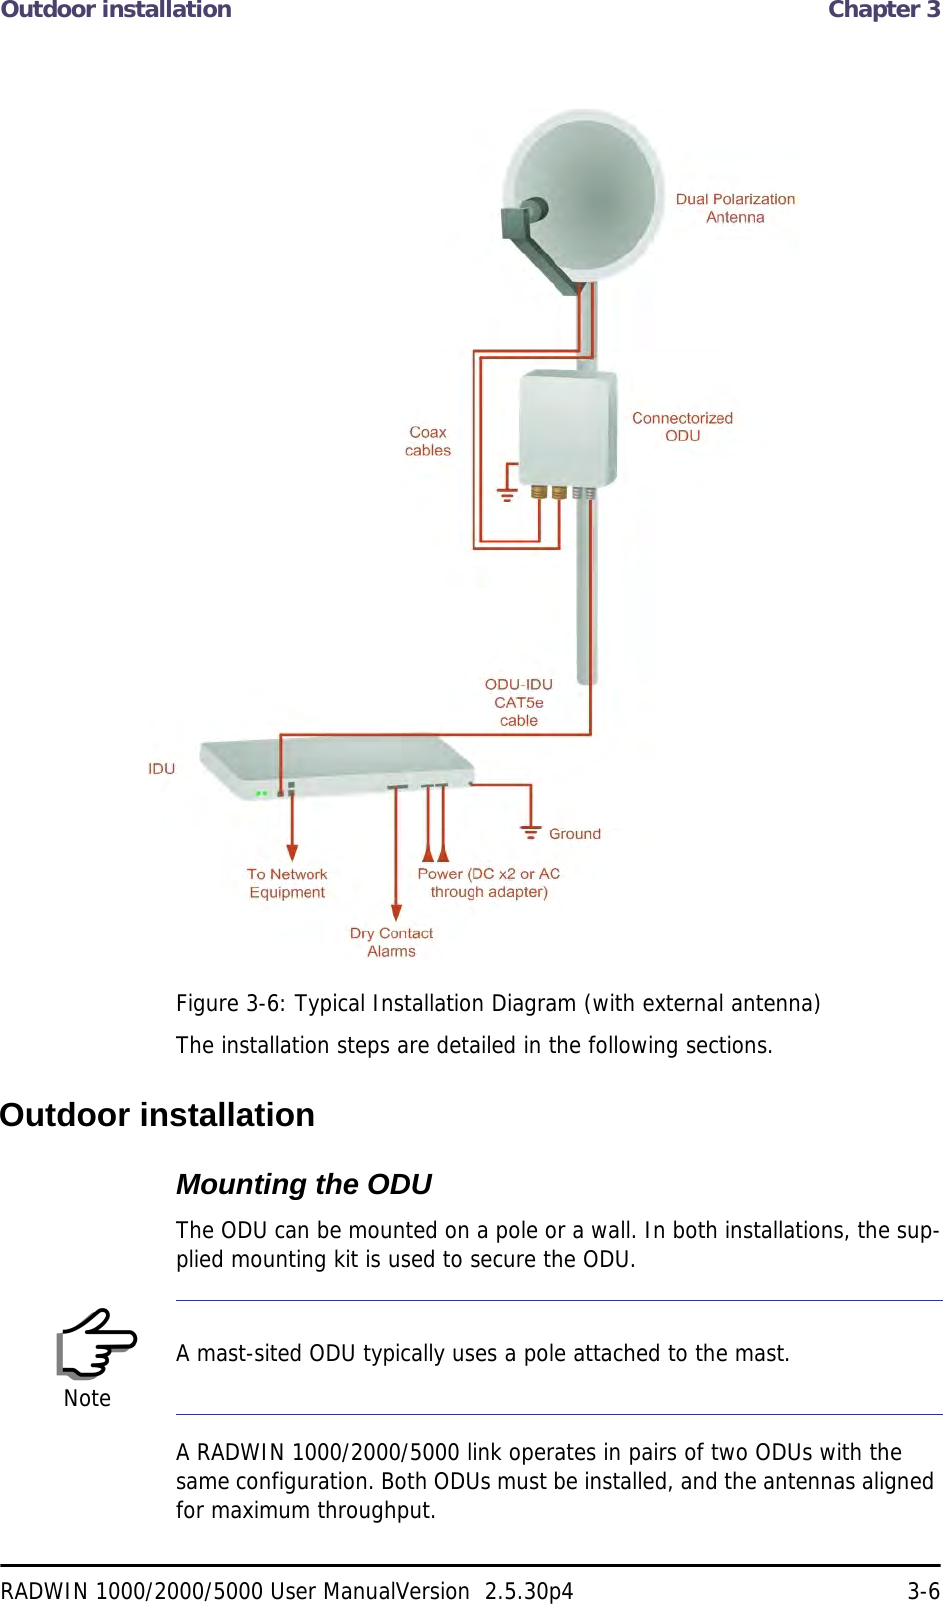 Outdoor installation  Chapter 3RADWIN 1000/2000/5000 User ManualVersion  2.5.30p4 3-6Figure 3-6: Typical Installation Diagram (with external antenna)The installation steps are detailed in the following sections.Outdoor installationMounting the ODUThe ODU can be mounted on a pole or a wall. In both installations, the sup-plied mounting kit is used to secure the ODU.A RADWIN 1000/2000/5000 link operates in pairs of two ODUs with the same configuration. Both ODUs must be installed, and the antennas aligned for maximum throughput.NoteA mast-sited ODU typically uses a pole attached to the mast.